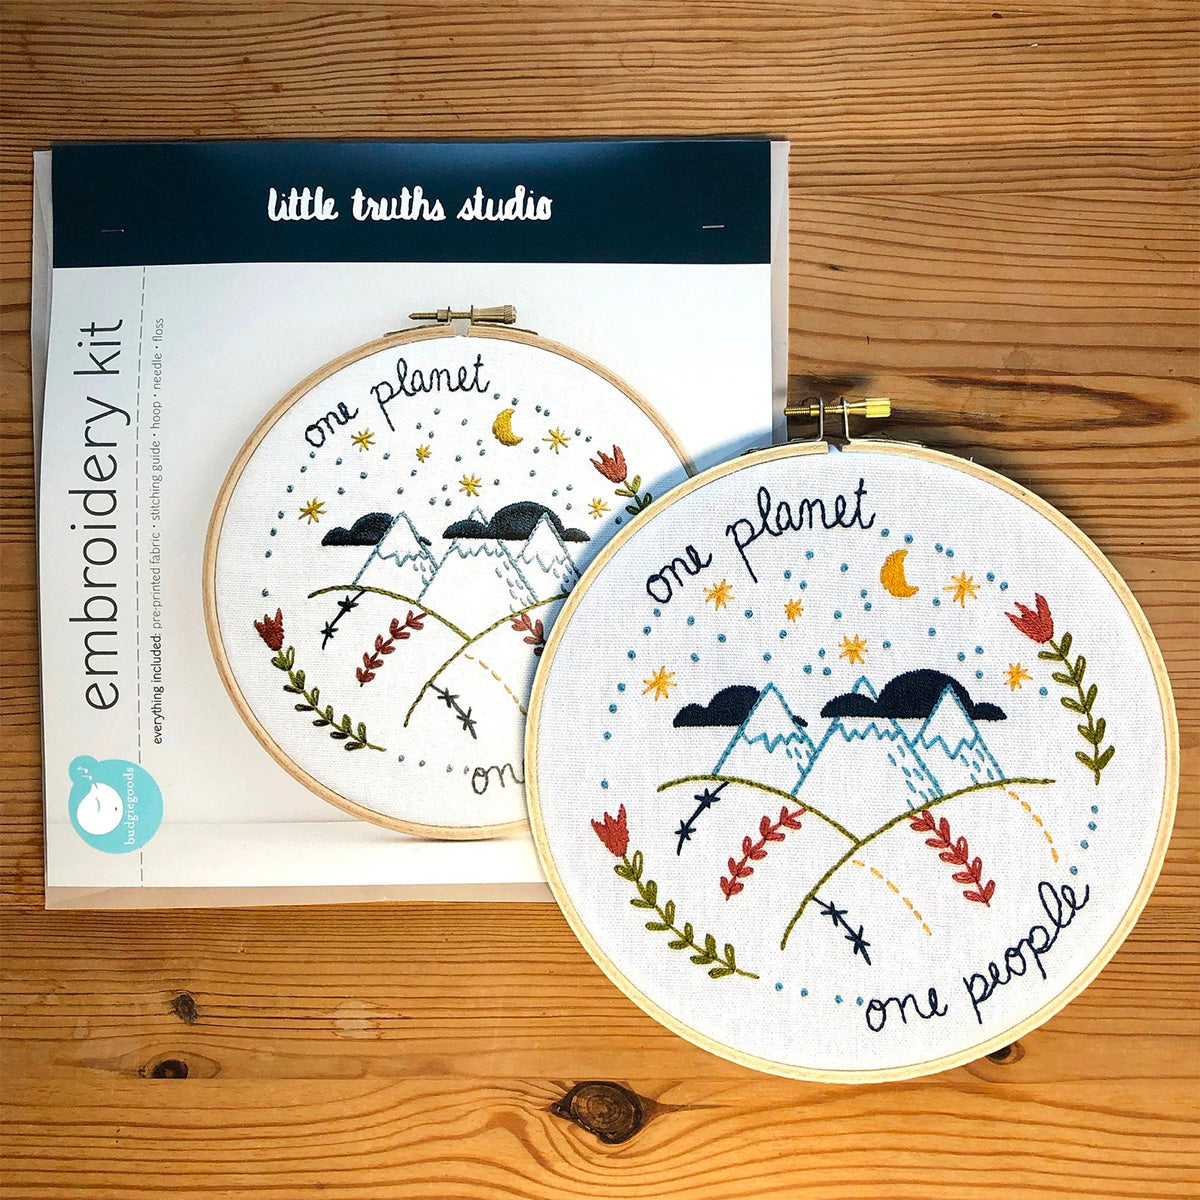 One Planet Hand Embroidery Kit